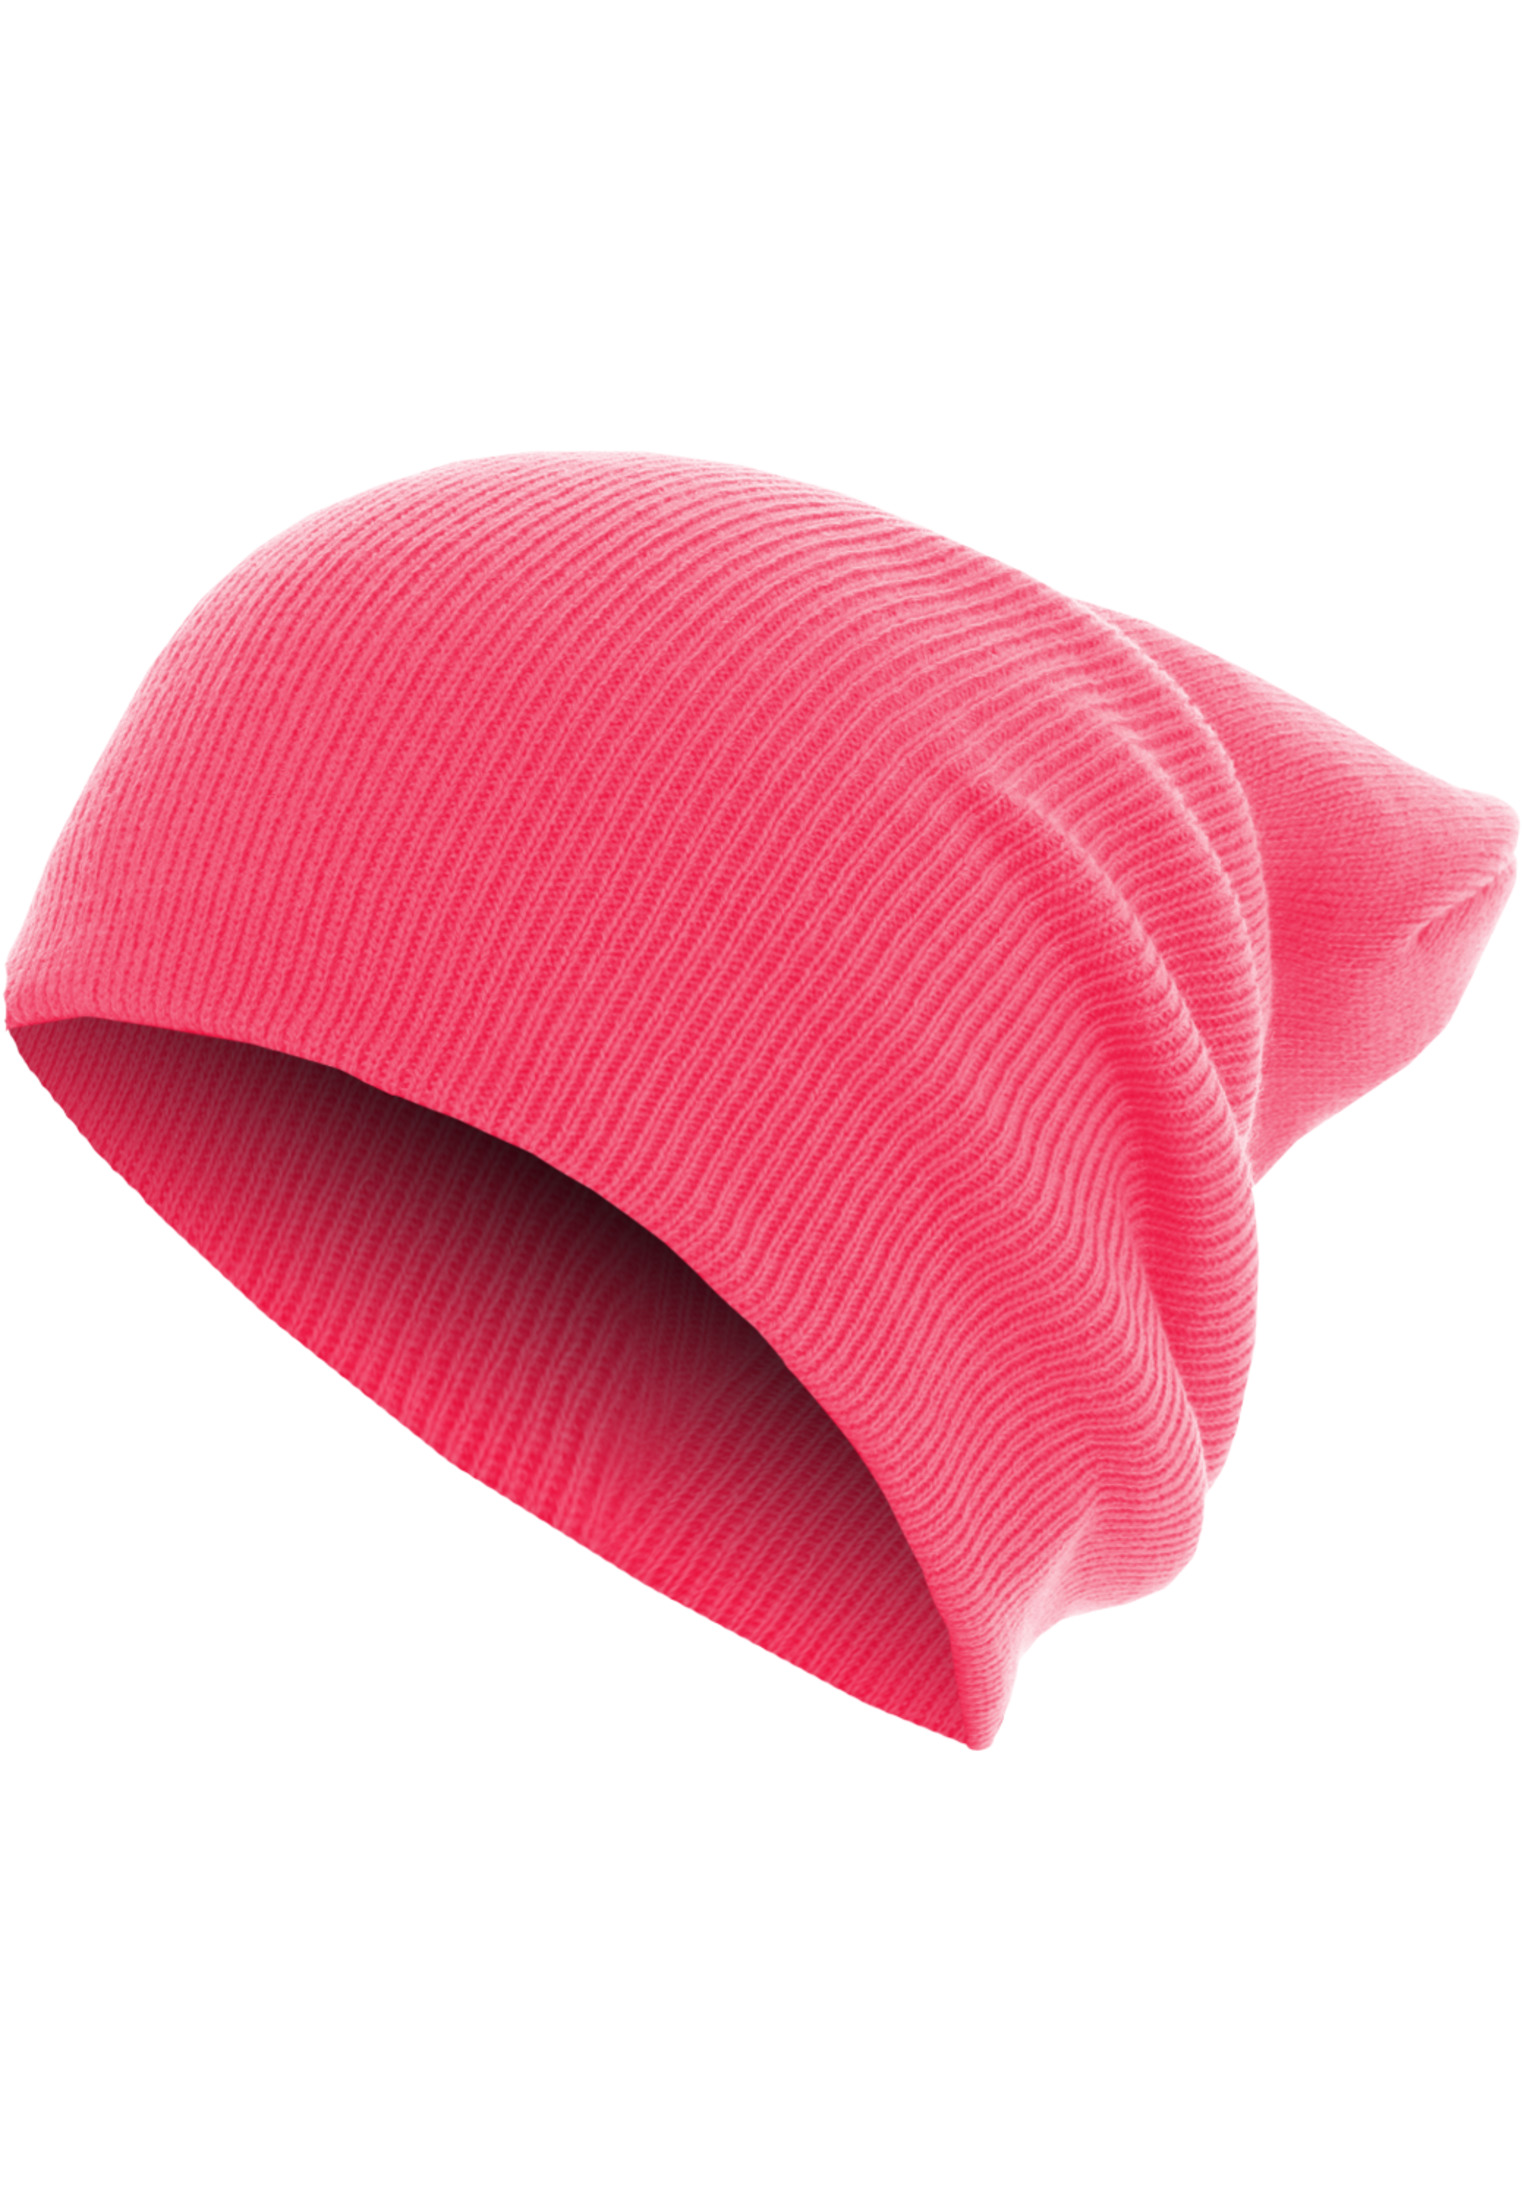 Caps & Beanies Beanie Basic Flap Long Version in Farbe neonpink